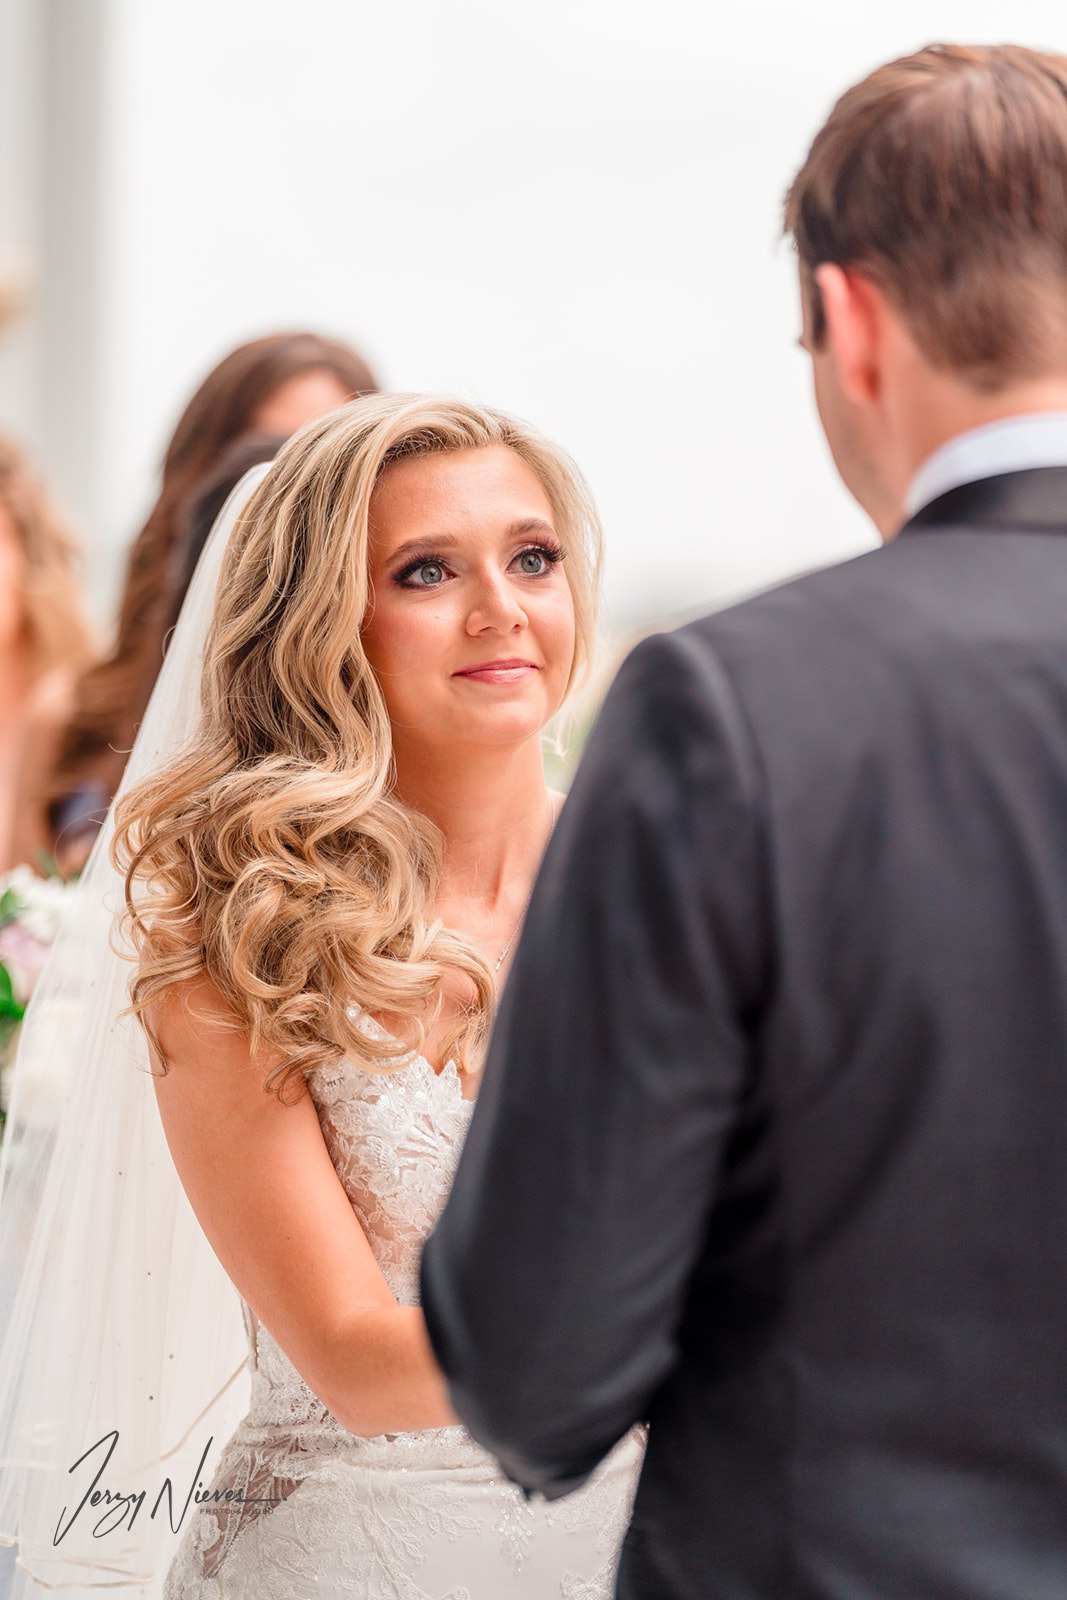 Over-the-shoulder shot of Nathan giving vows to Brittany at the altar, holding her hands as she looks at him intently.